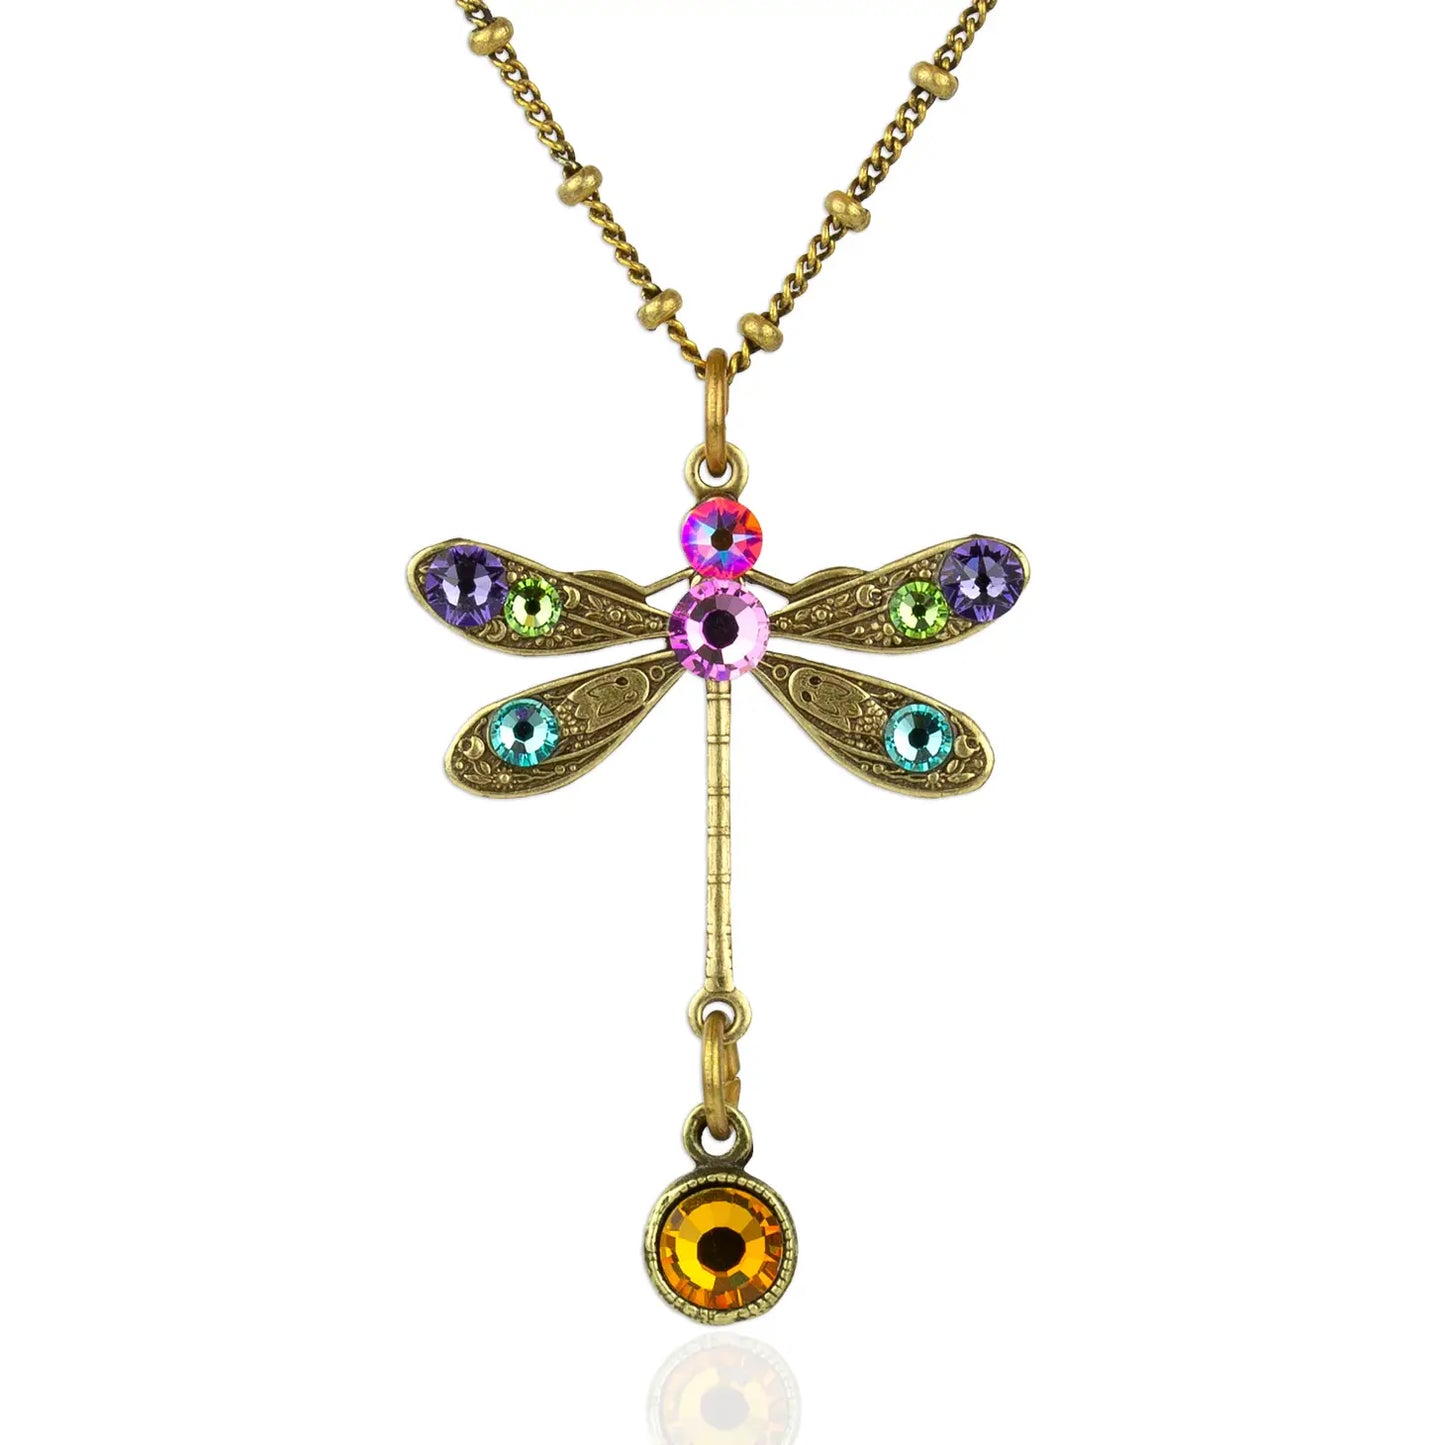 Sylvie Crystal Dragonfly Necklace